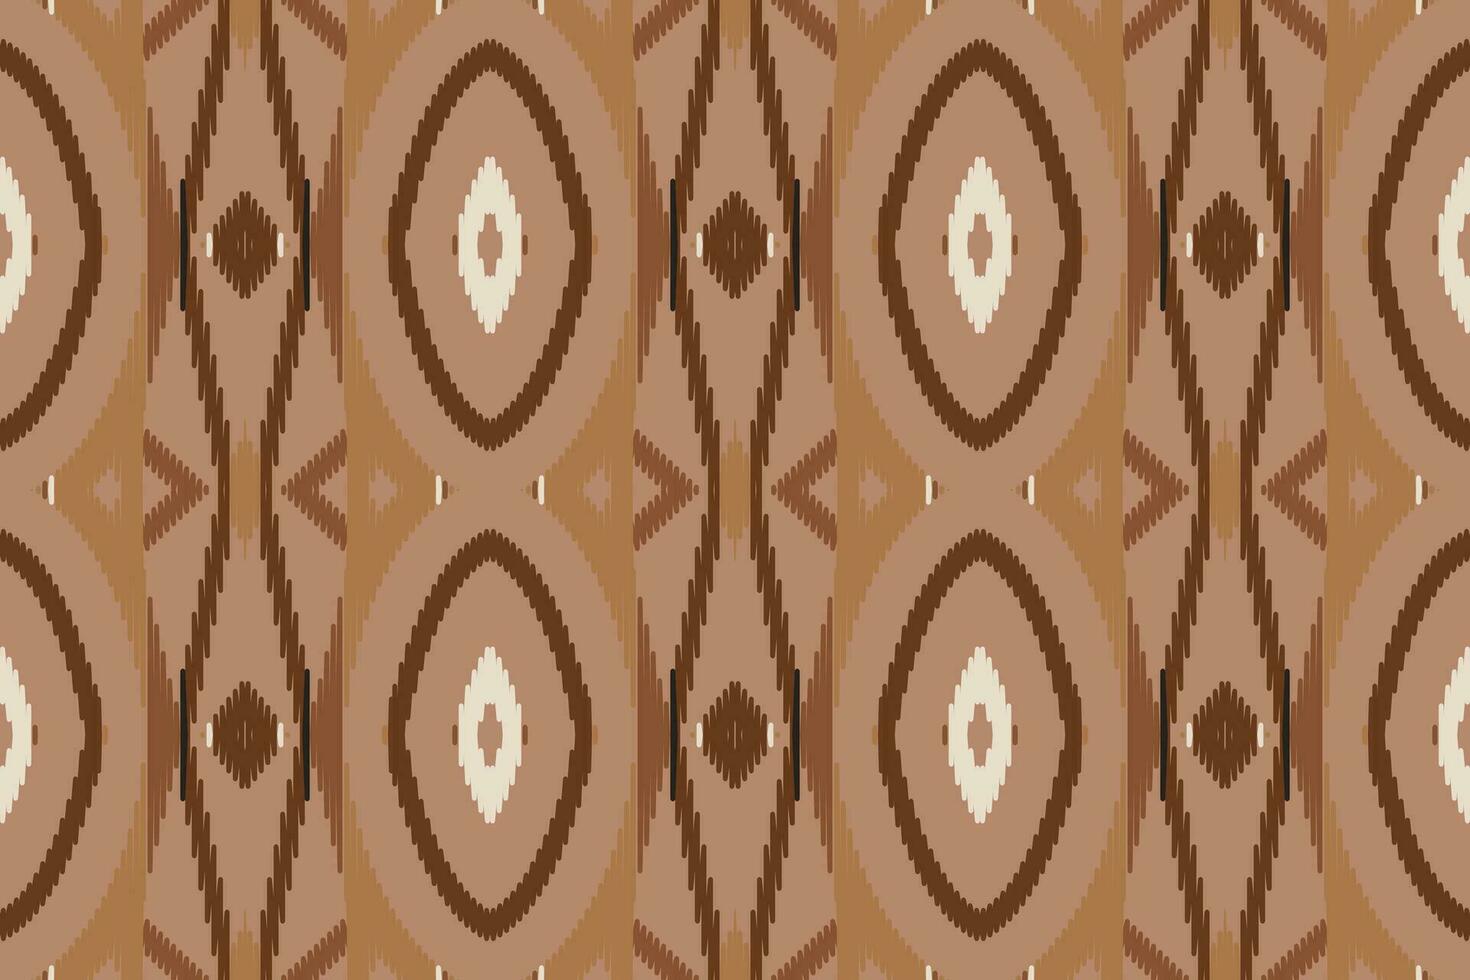 Motif Ikat Paisley Embroidery Background. Ikat Stripes Geometric Ethnic Oriental Pattern Traditional. Ikat Aztec Style Abstract Design for Print Texture,fabric,saree,sari,carpet. vector